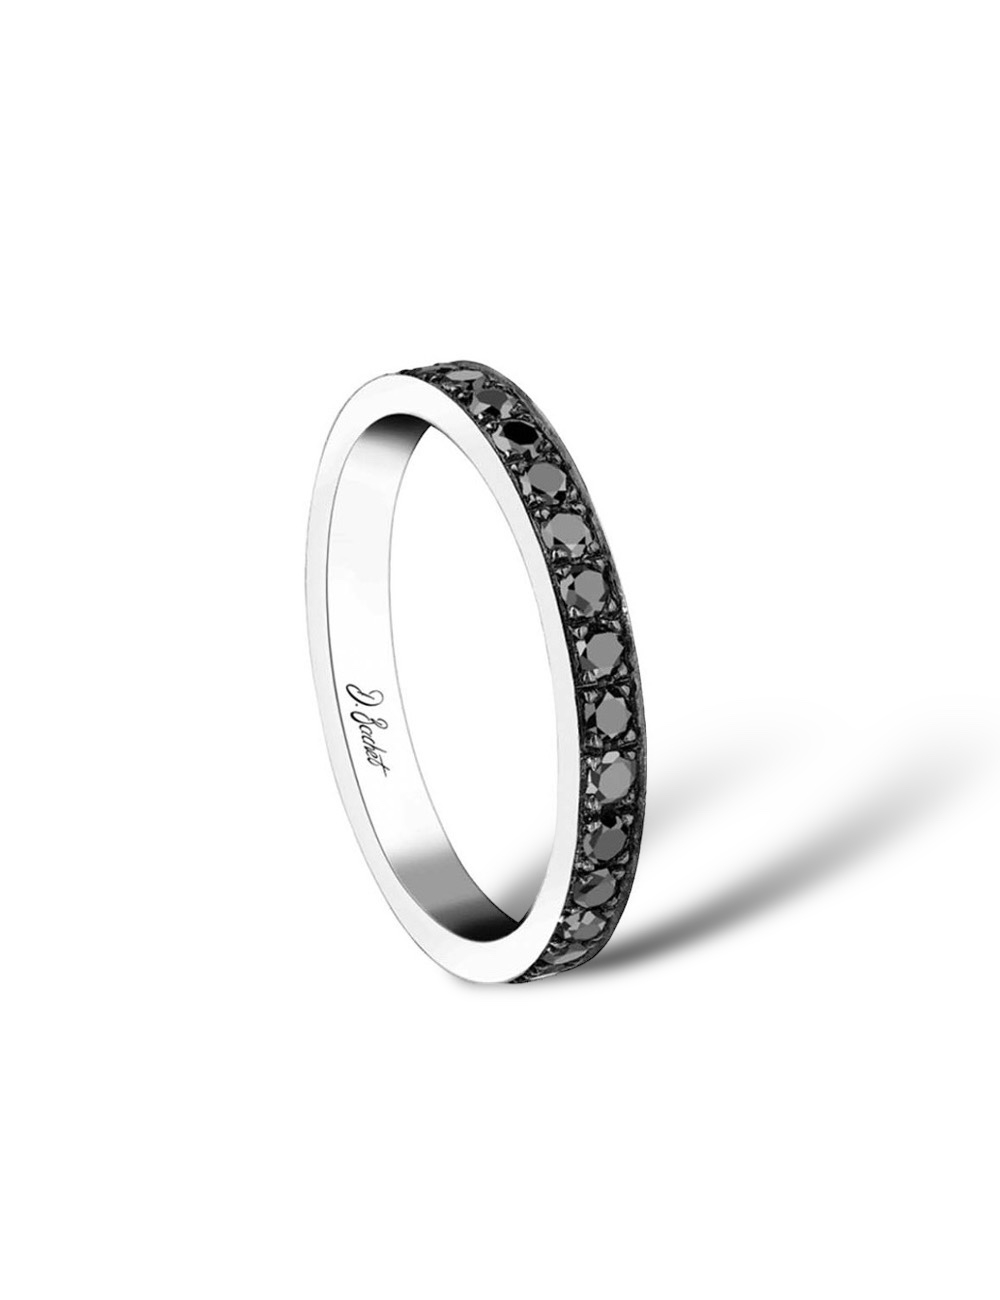 Unisex platinum wedding band, set with sparkling black diamonds around the ring, capturing light in a refined manner.